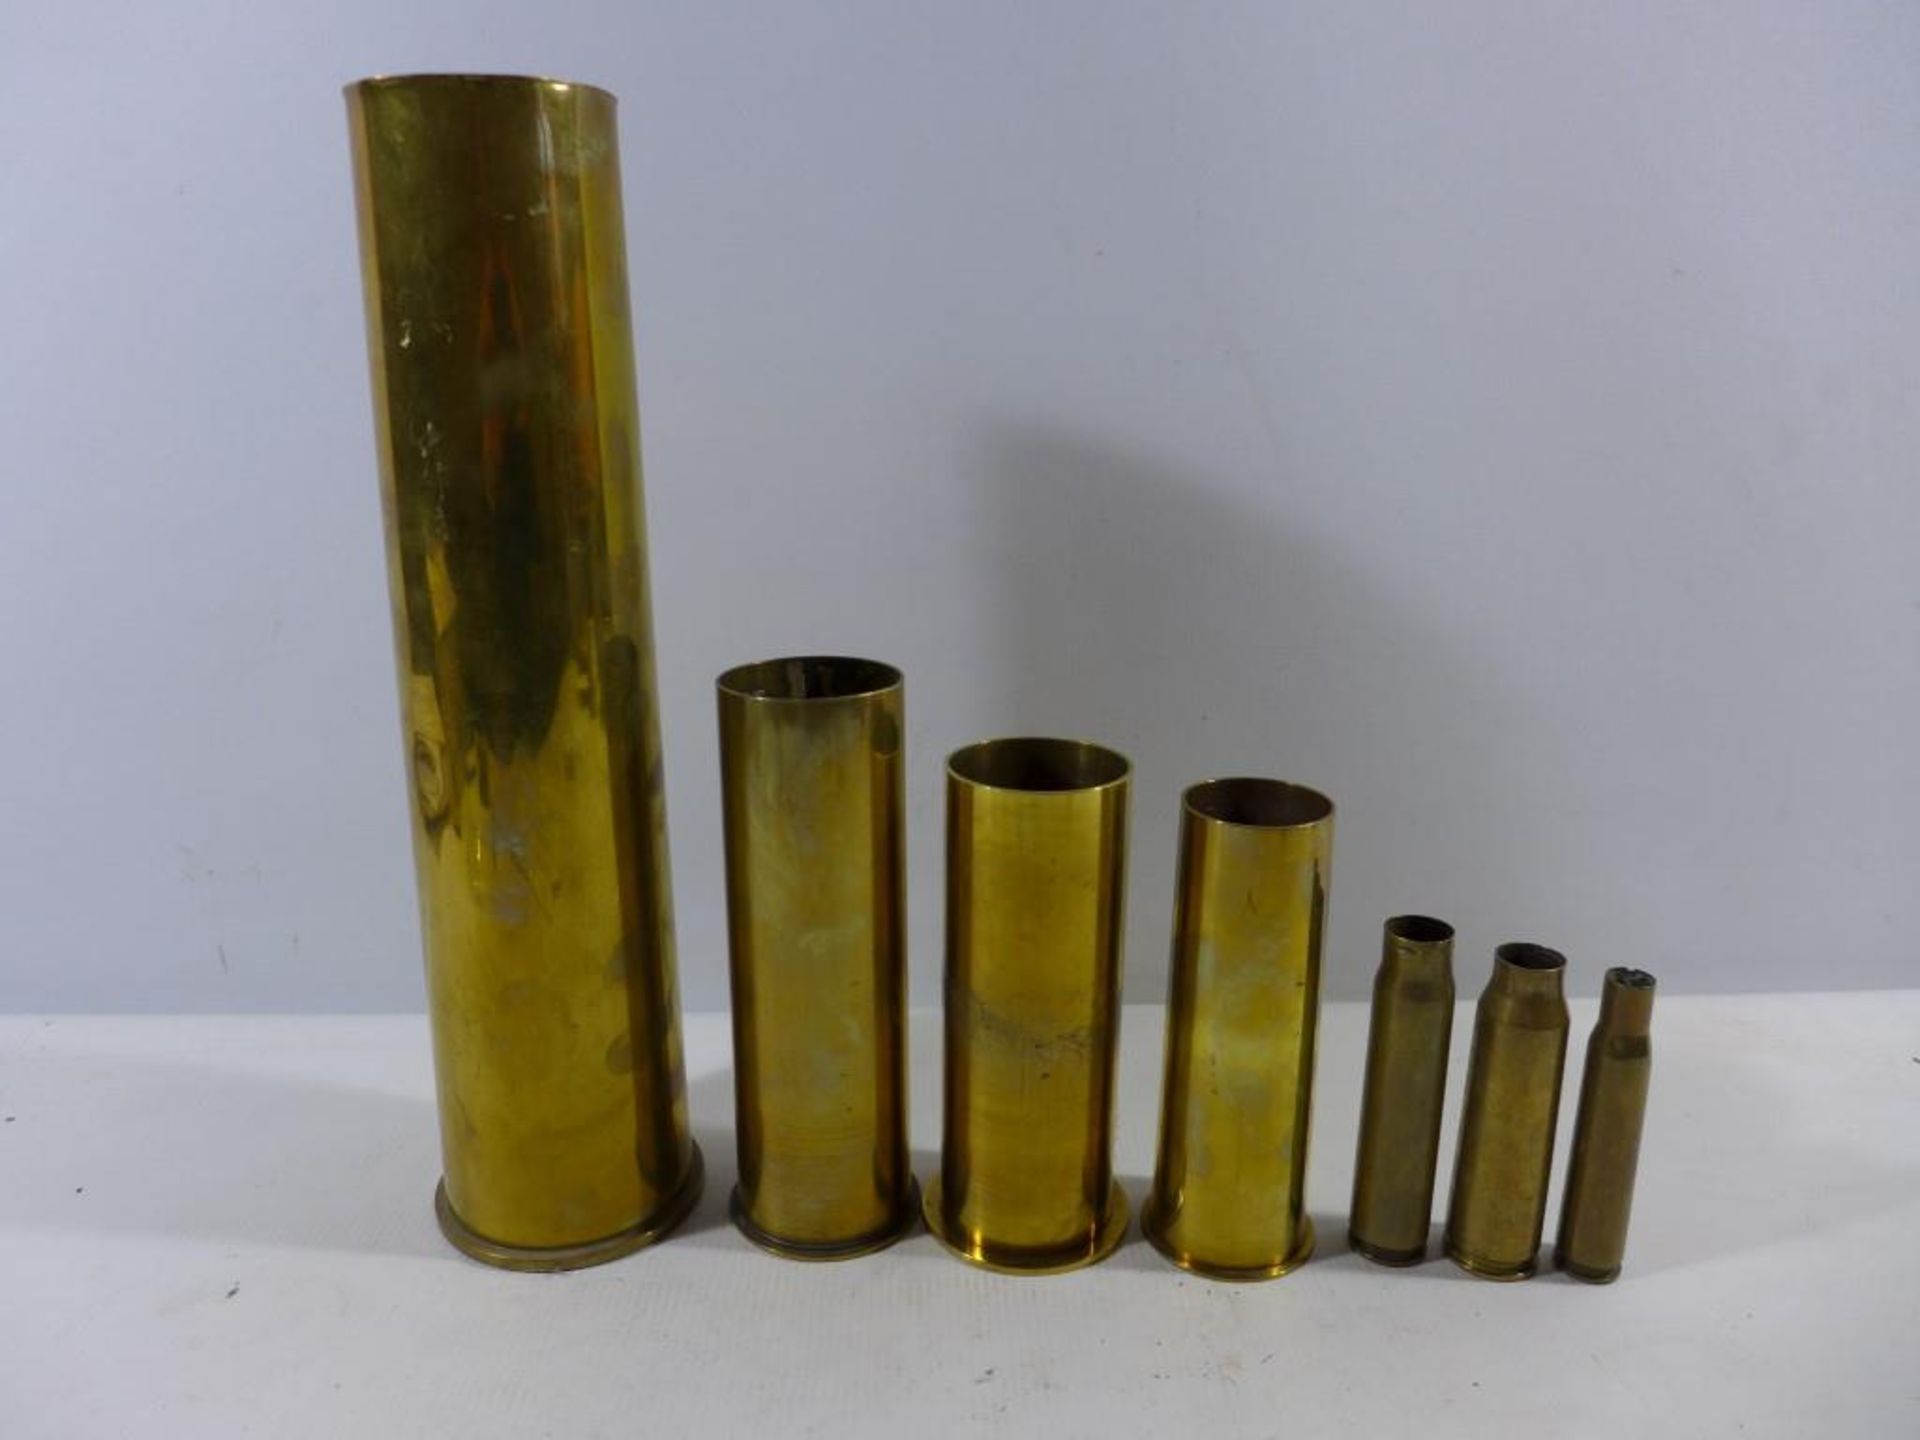 A COLLECTION OF SEVEN SHELL CASES, HEIGHTS VARY FROM 10 TO 35CM